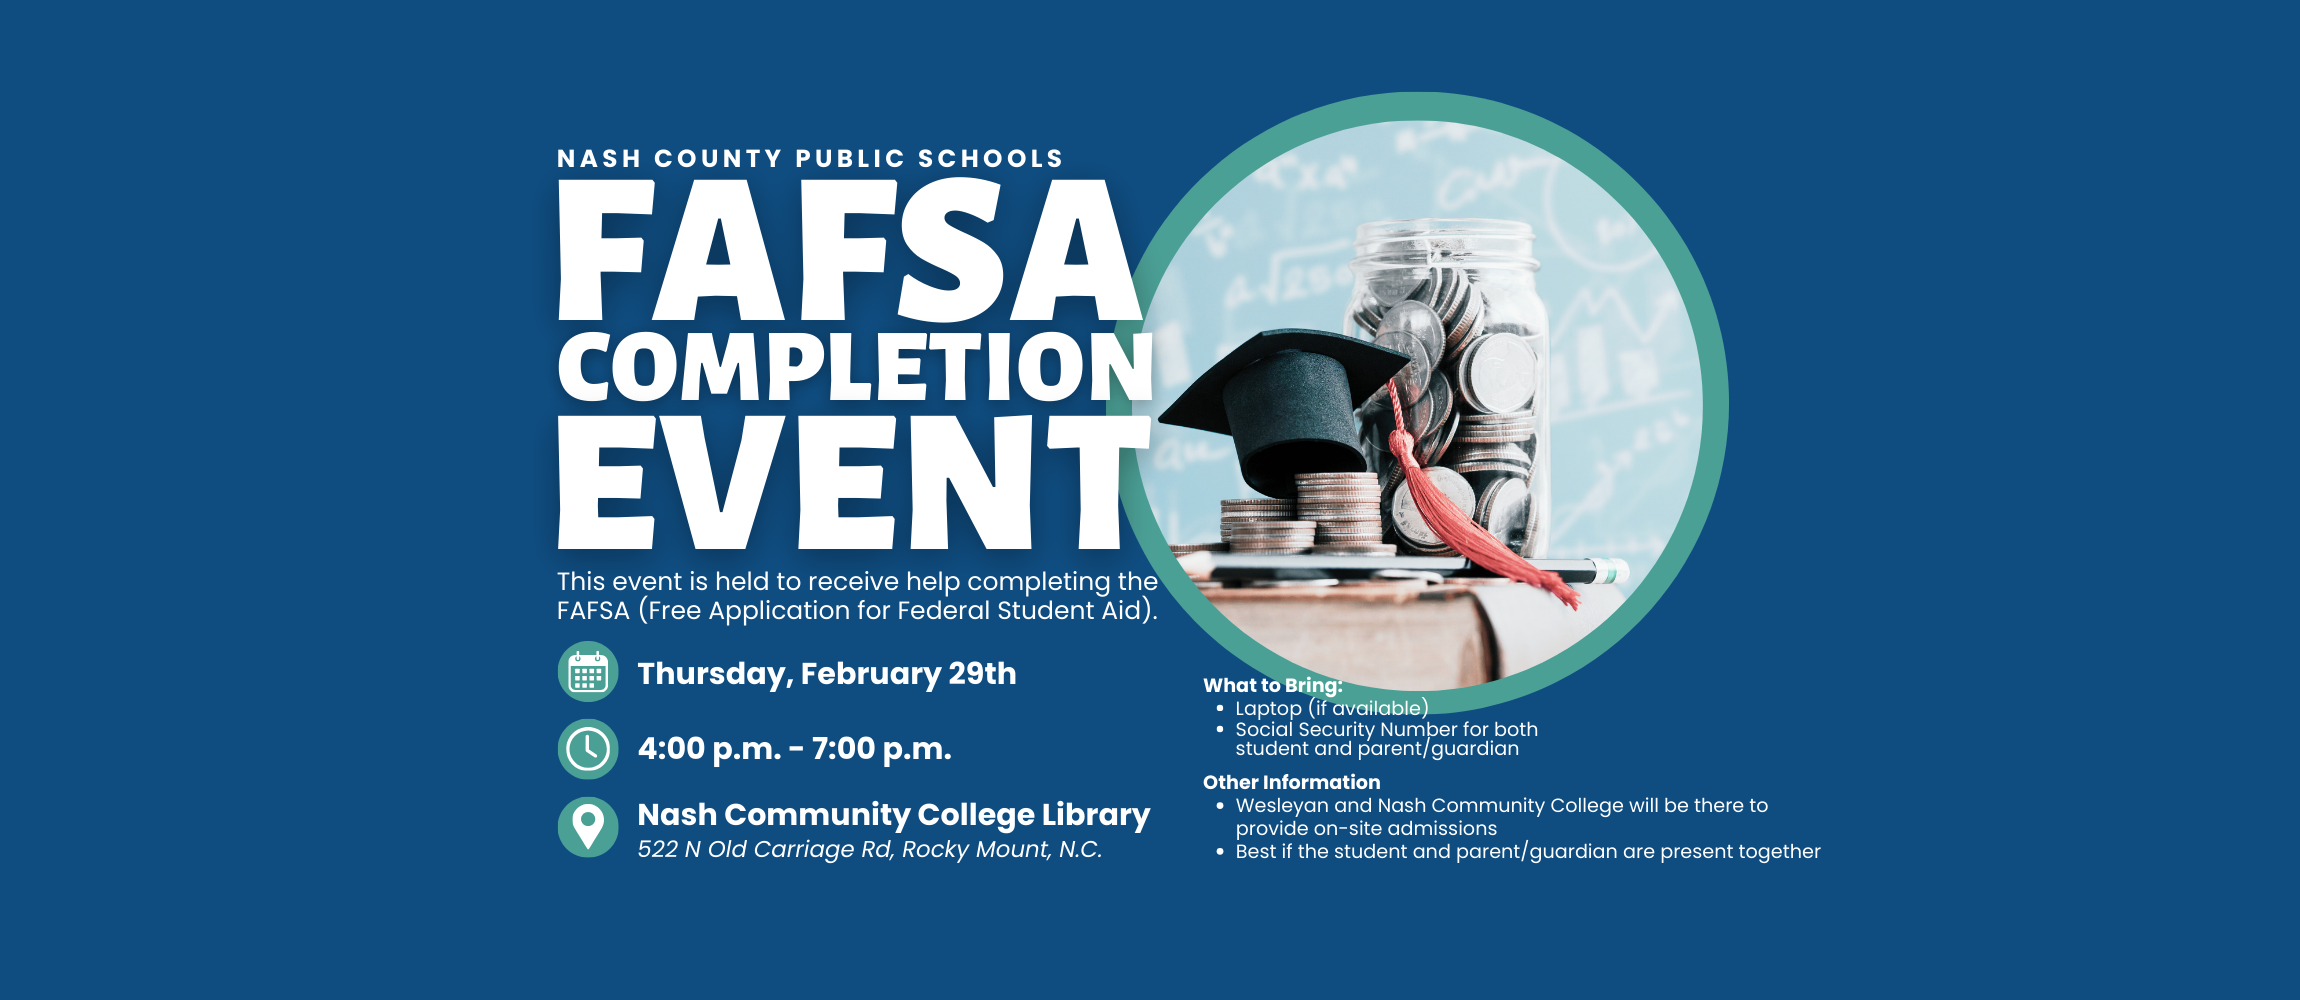 FAFSA completion event